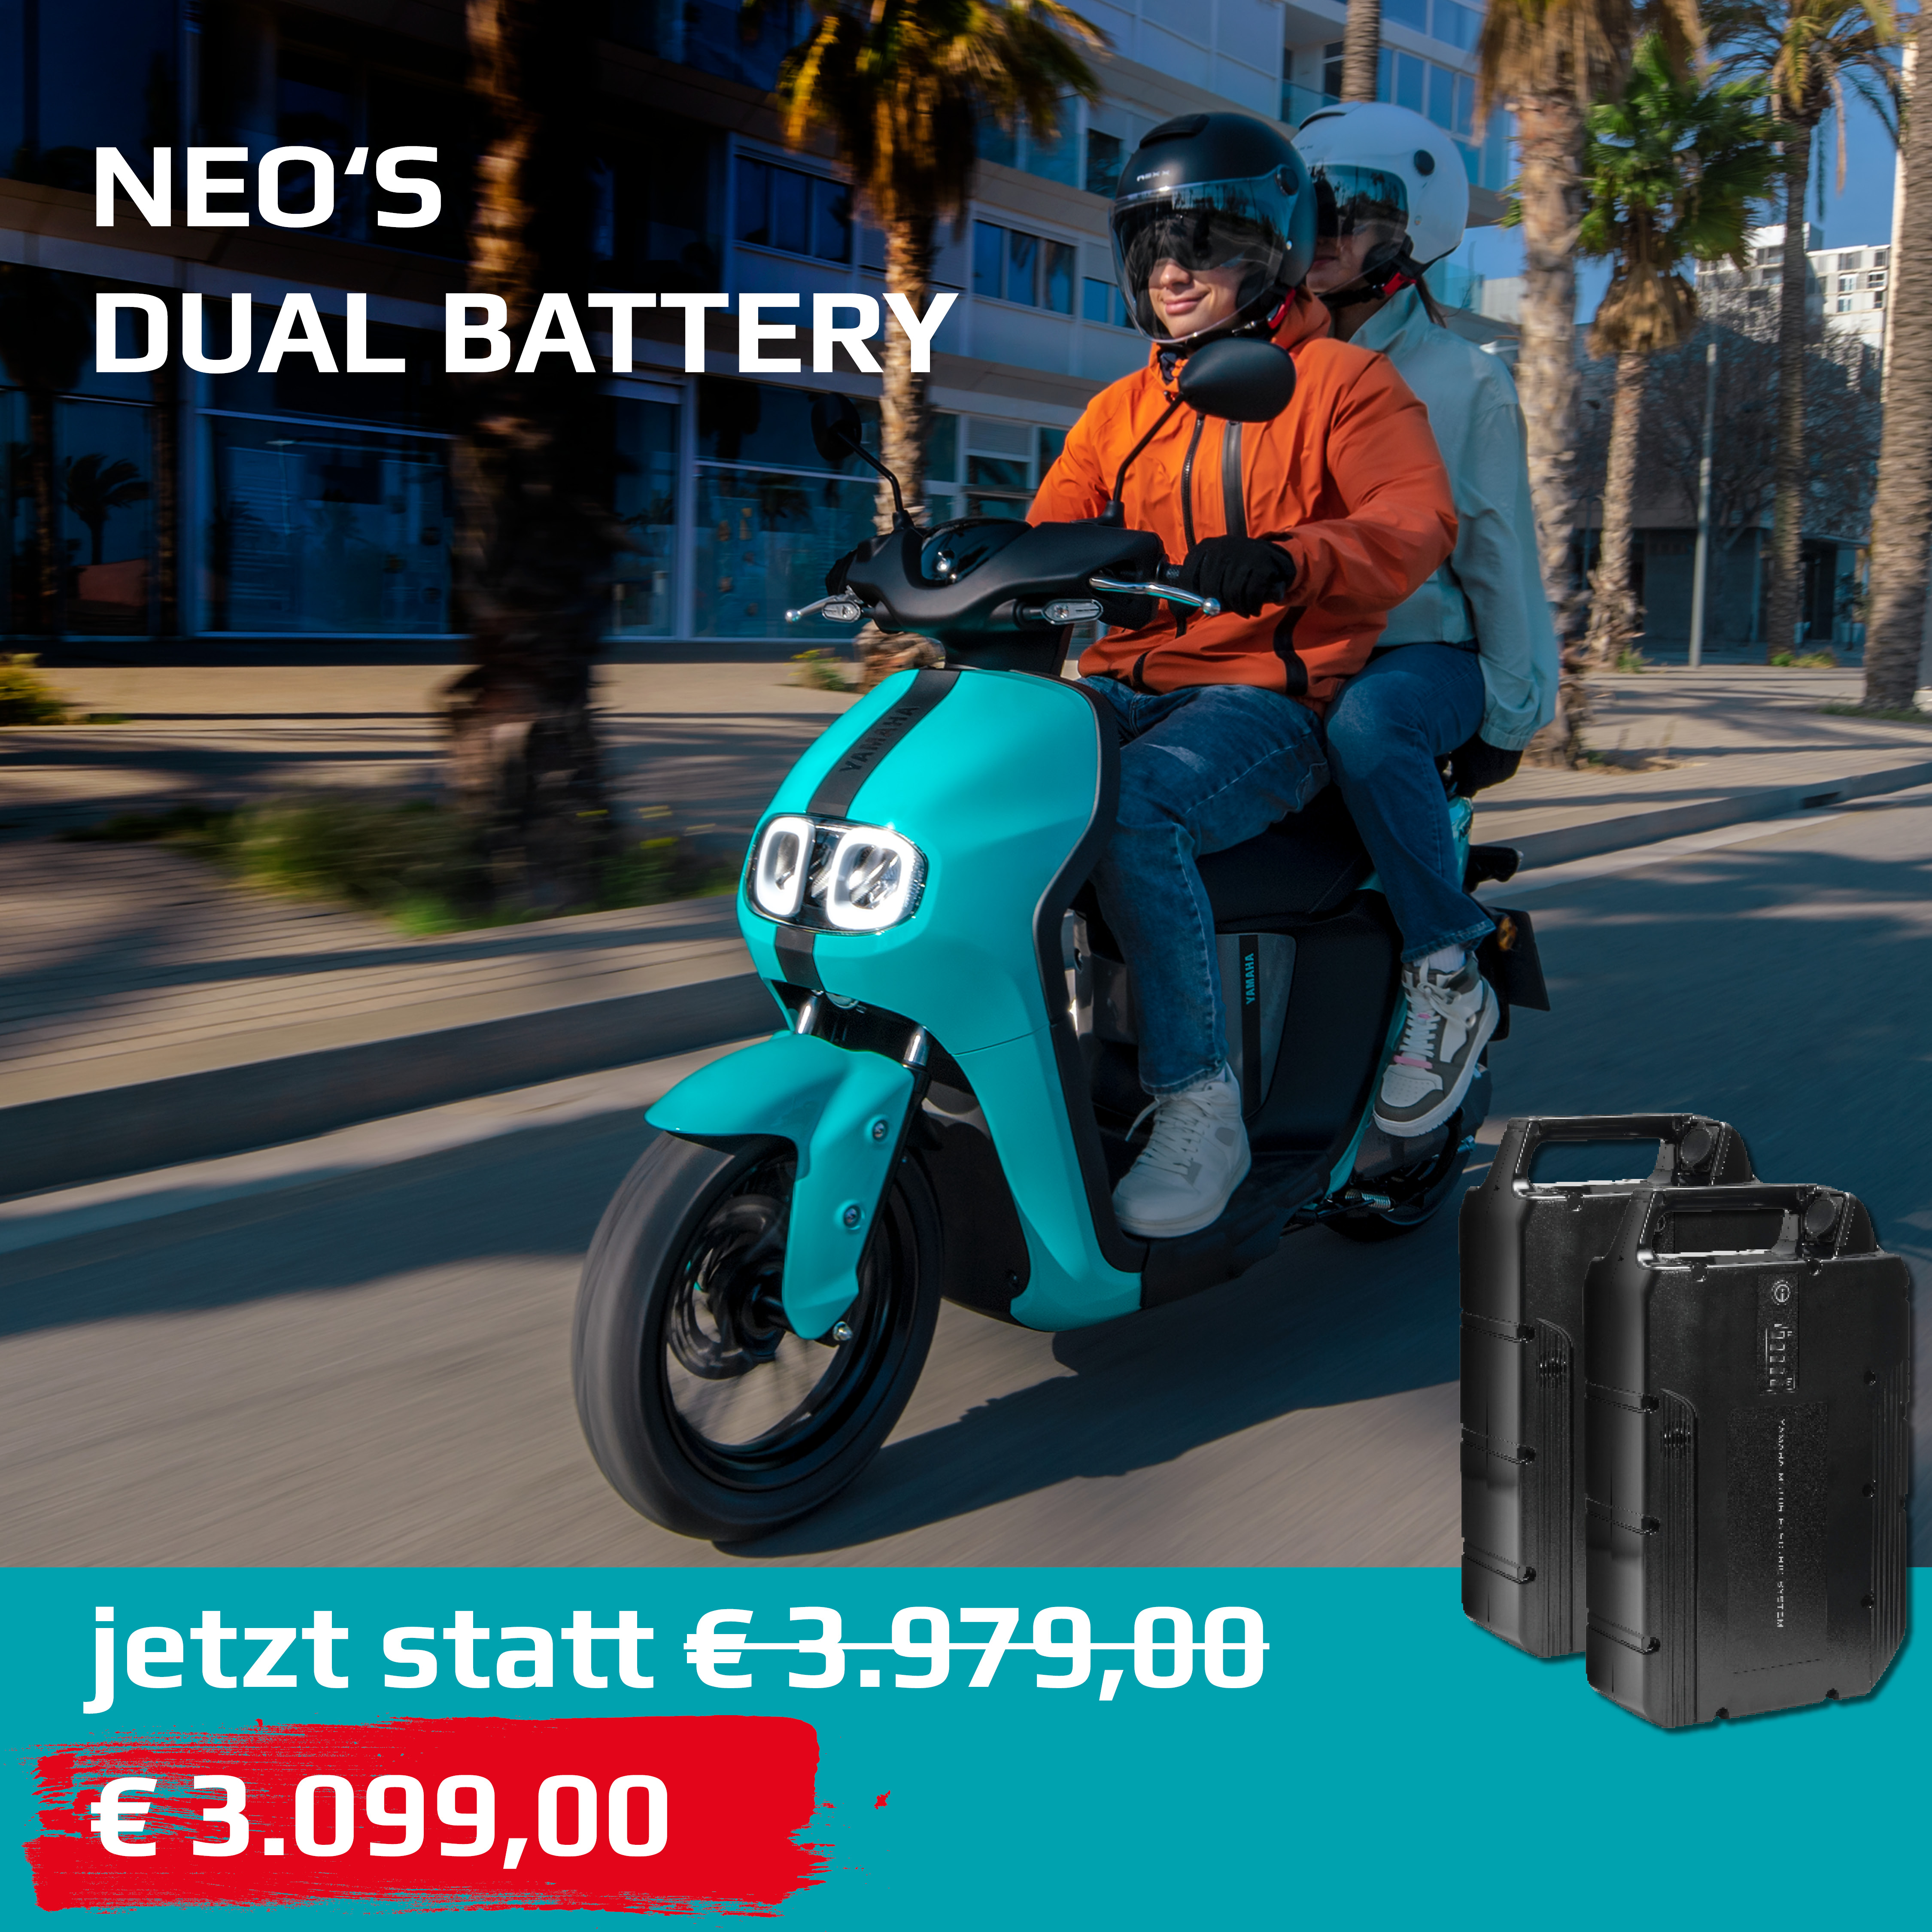 NEO‘s Dual Battery